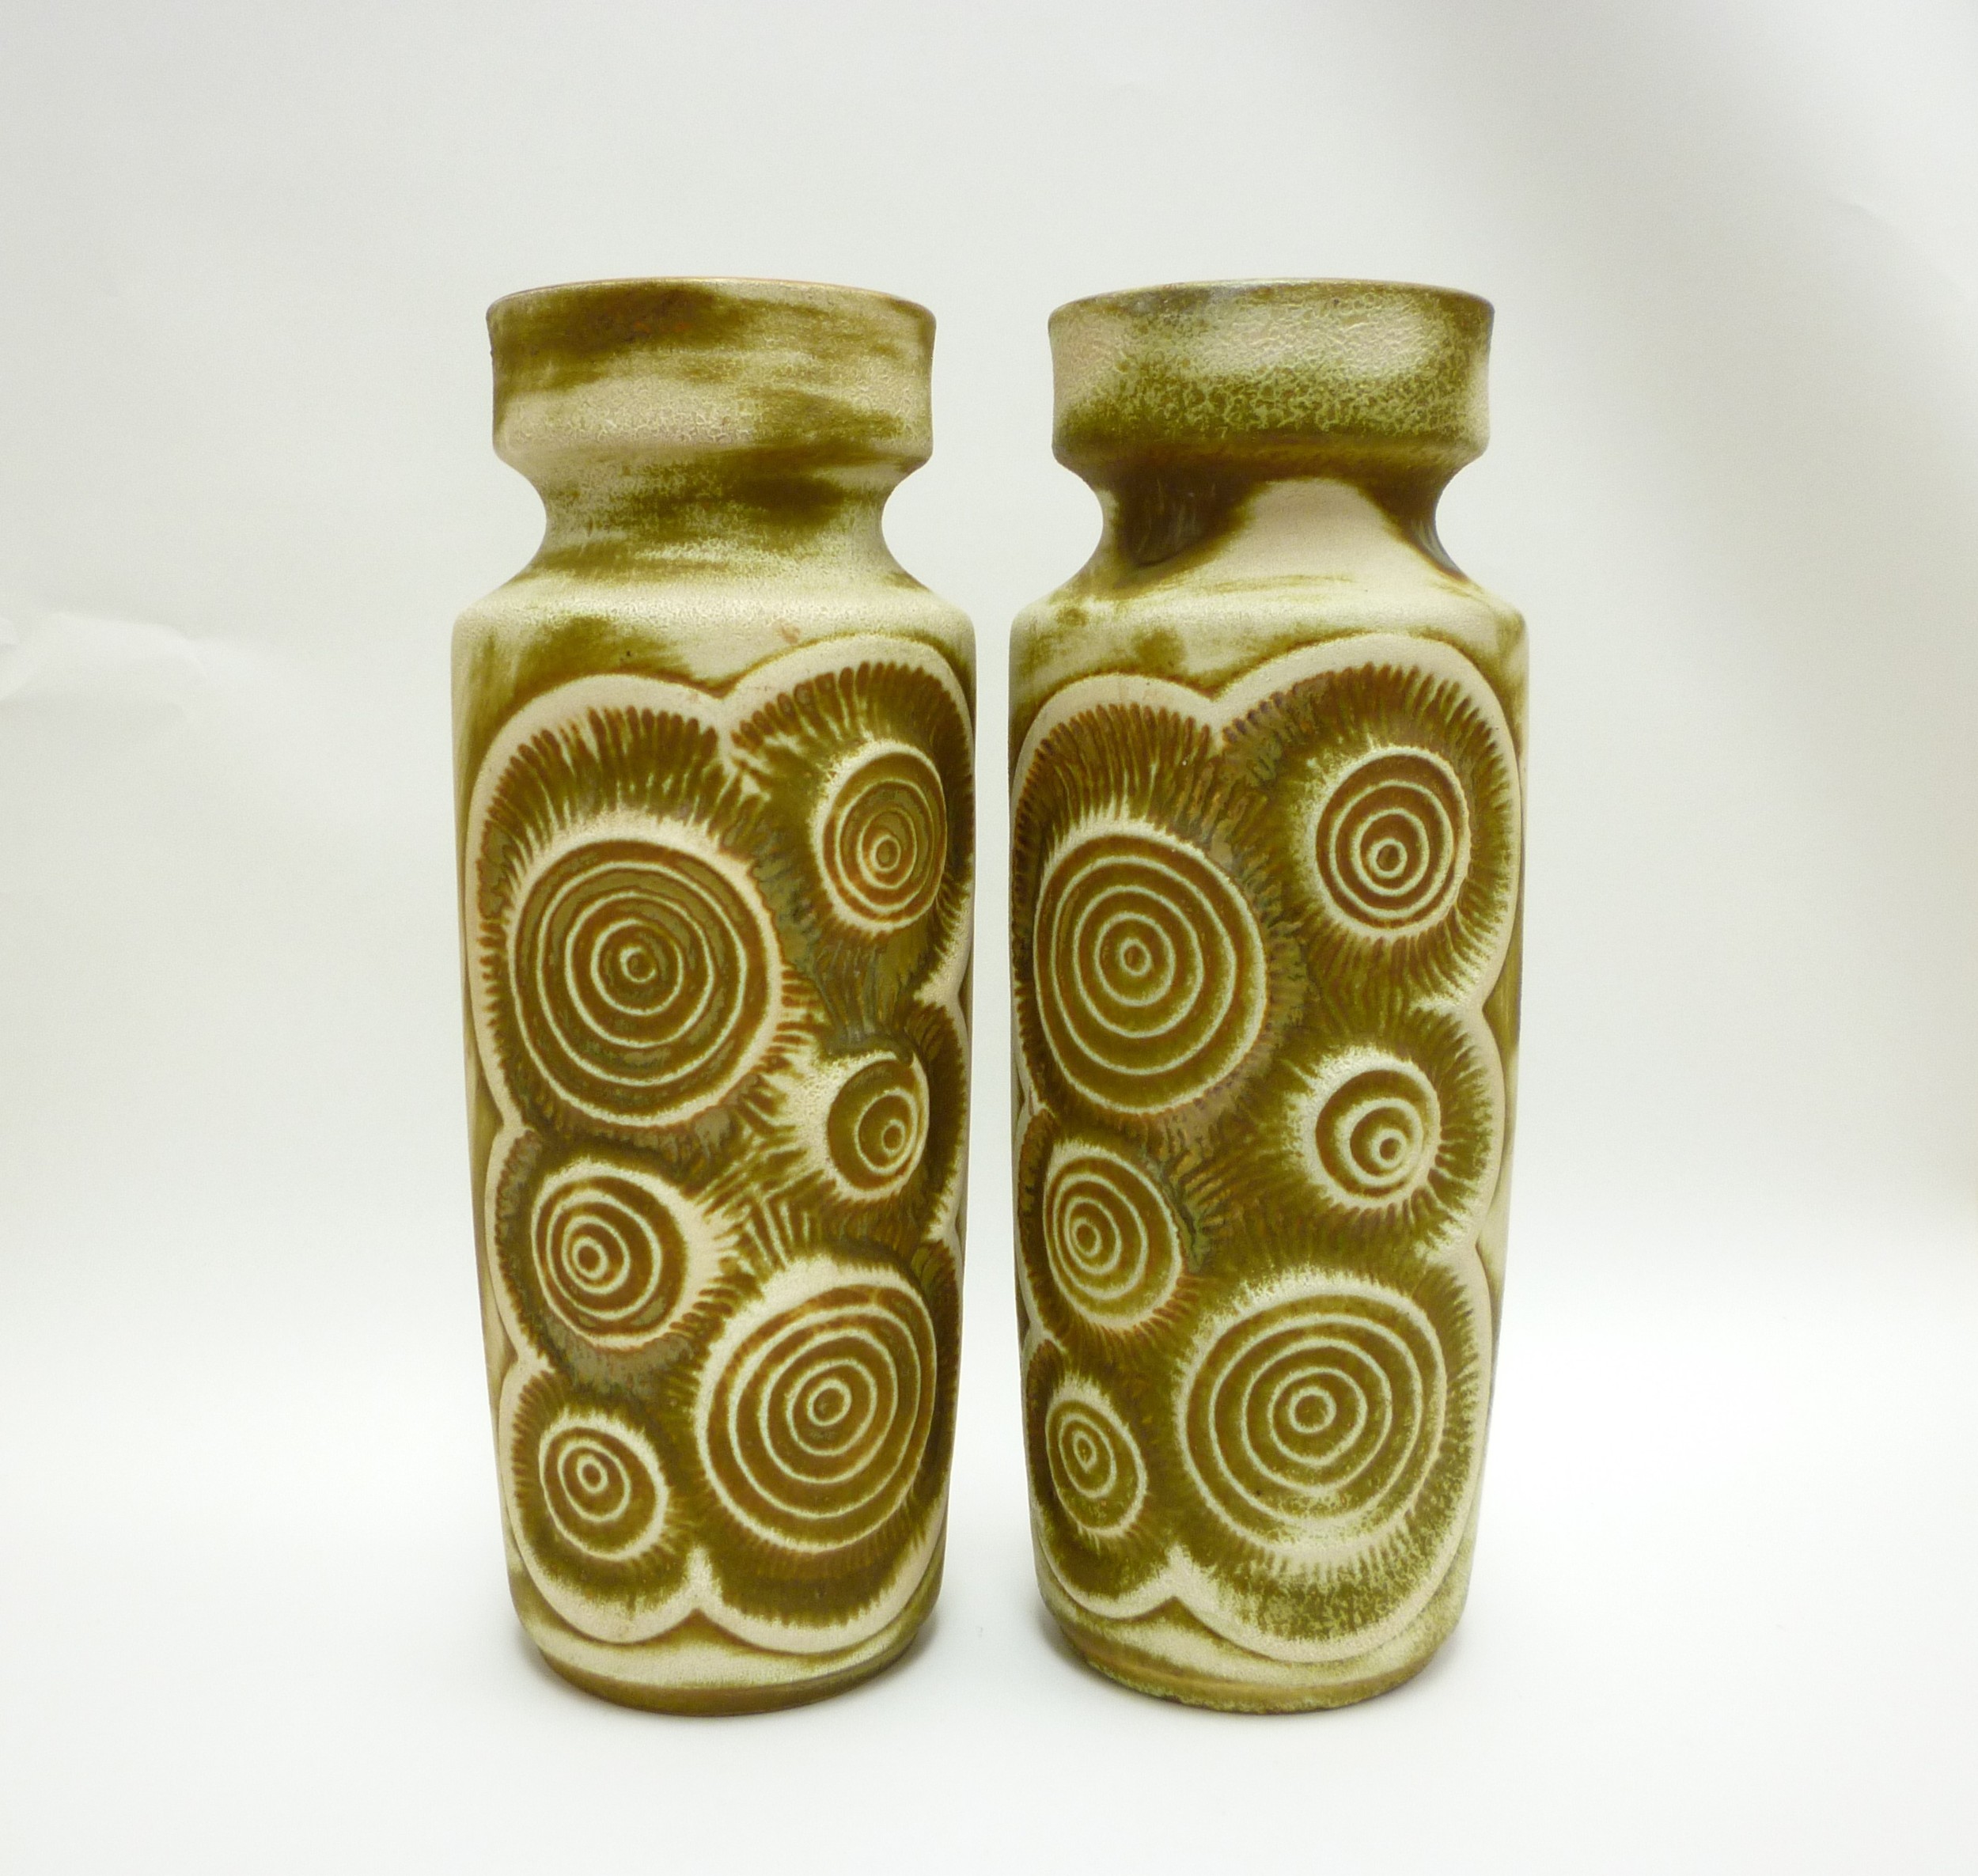 A Pair of Bay Keramik West German floor vases with relief moulded fossil design, caramel glazes,